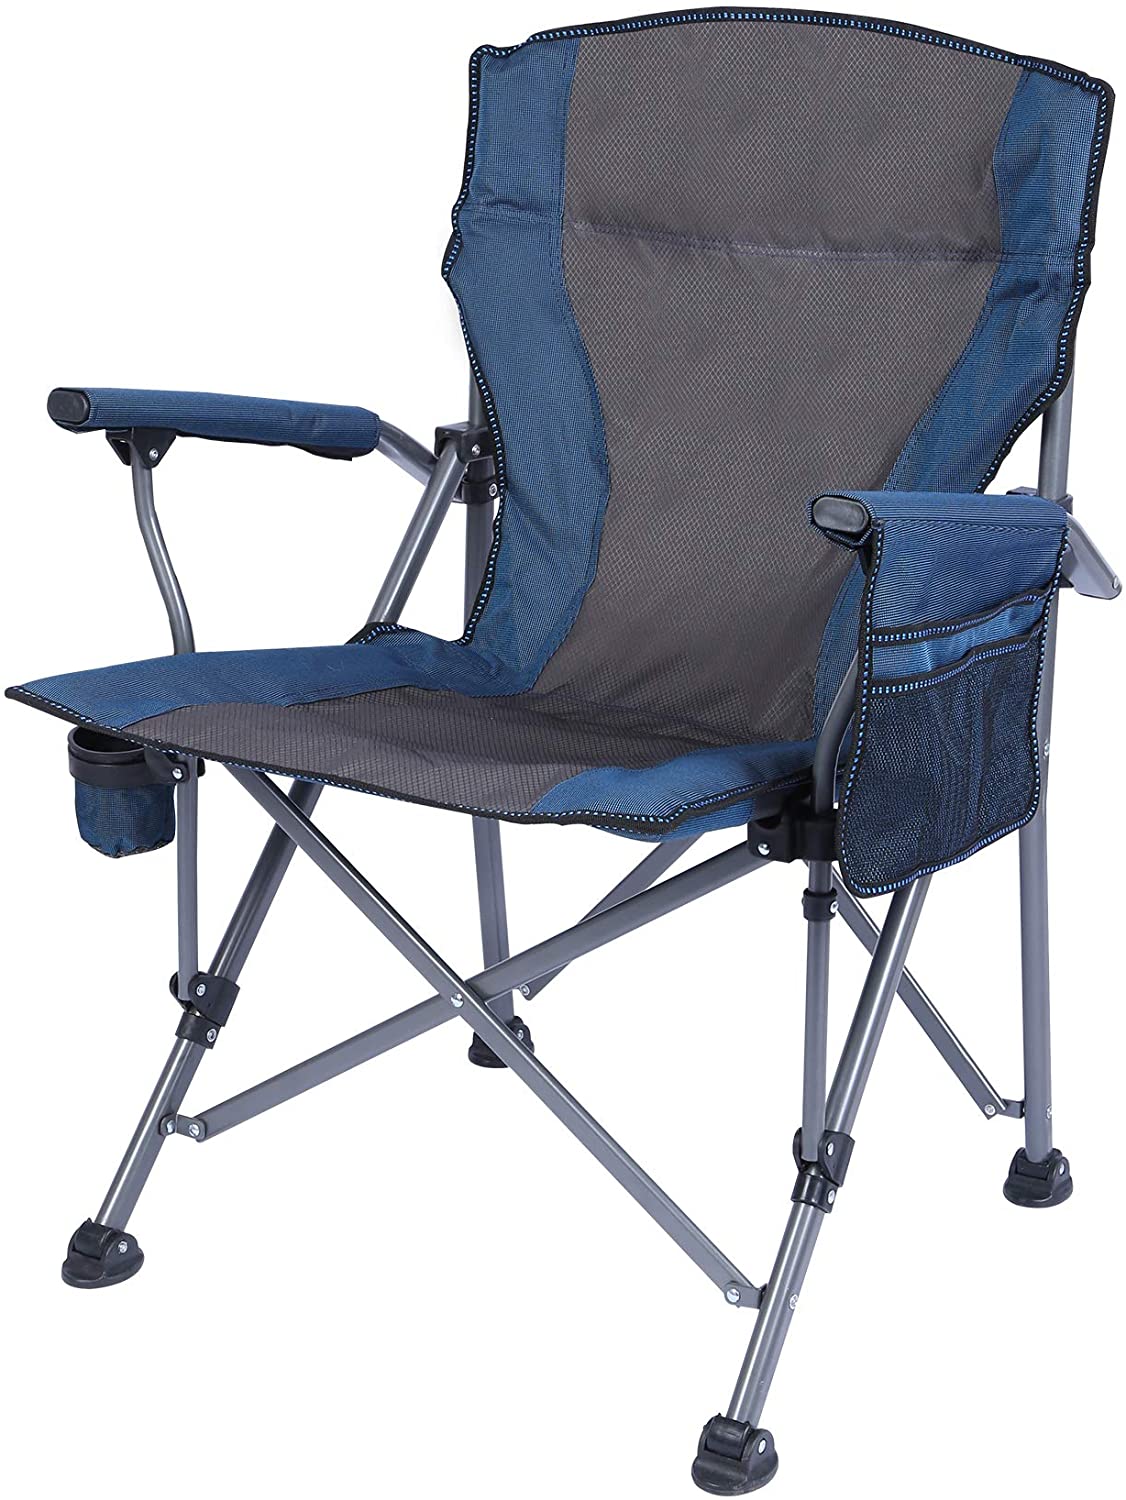 Camping Chairs for Adult Services